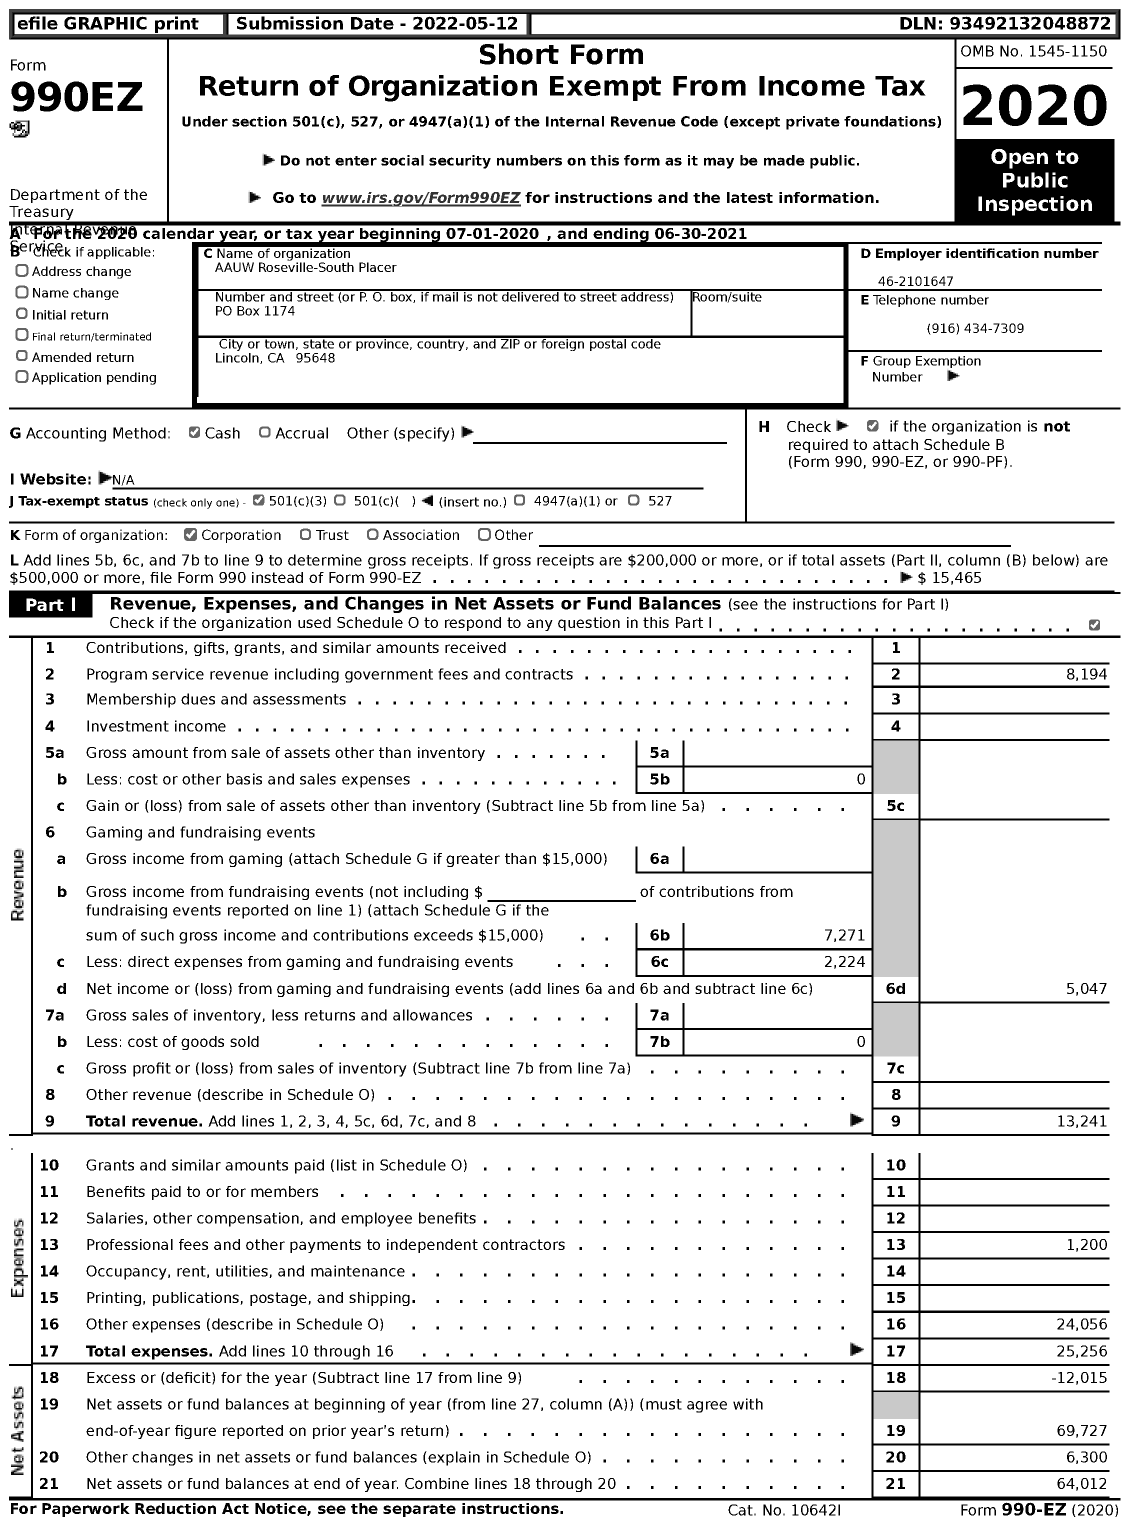 Image of first page of 2020 Form 990EZ for AAUW Roseville-South Placer